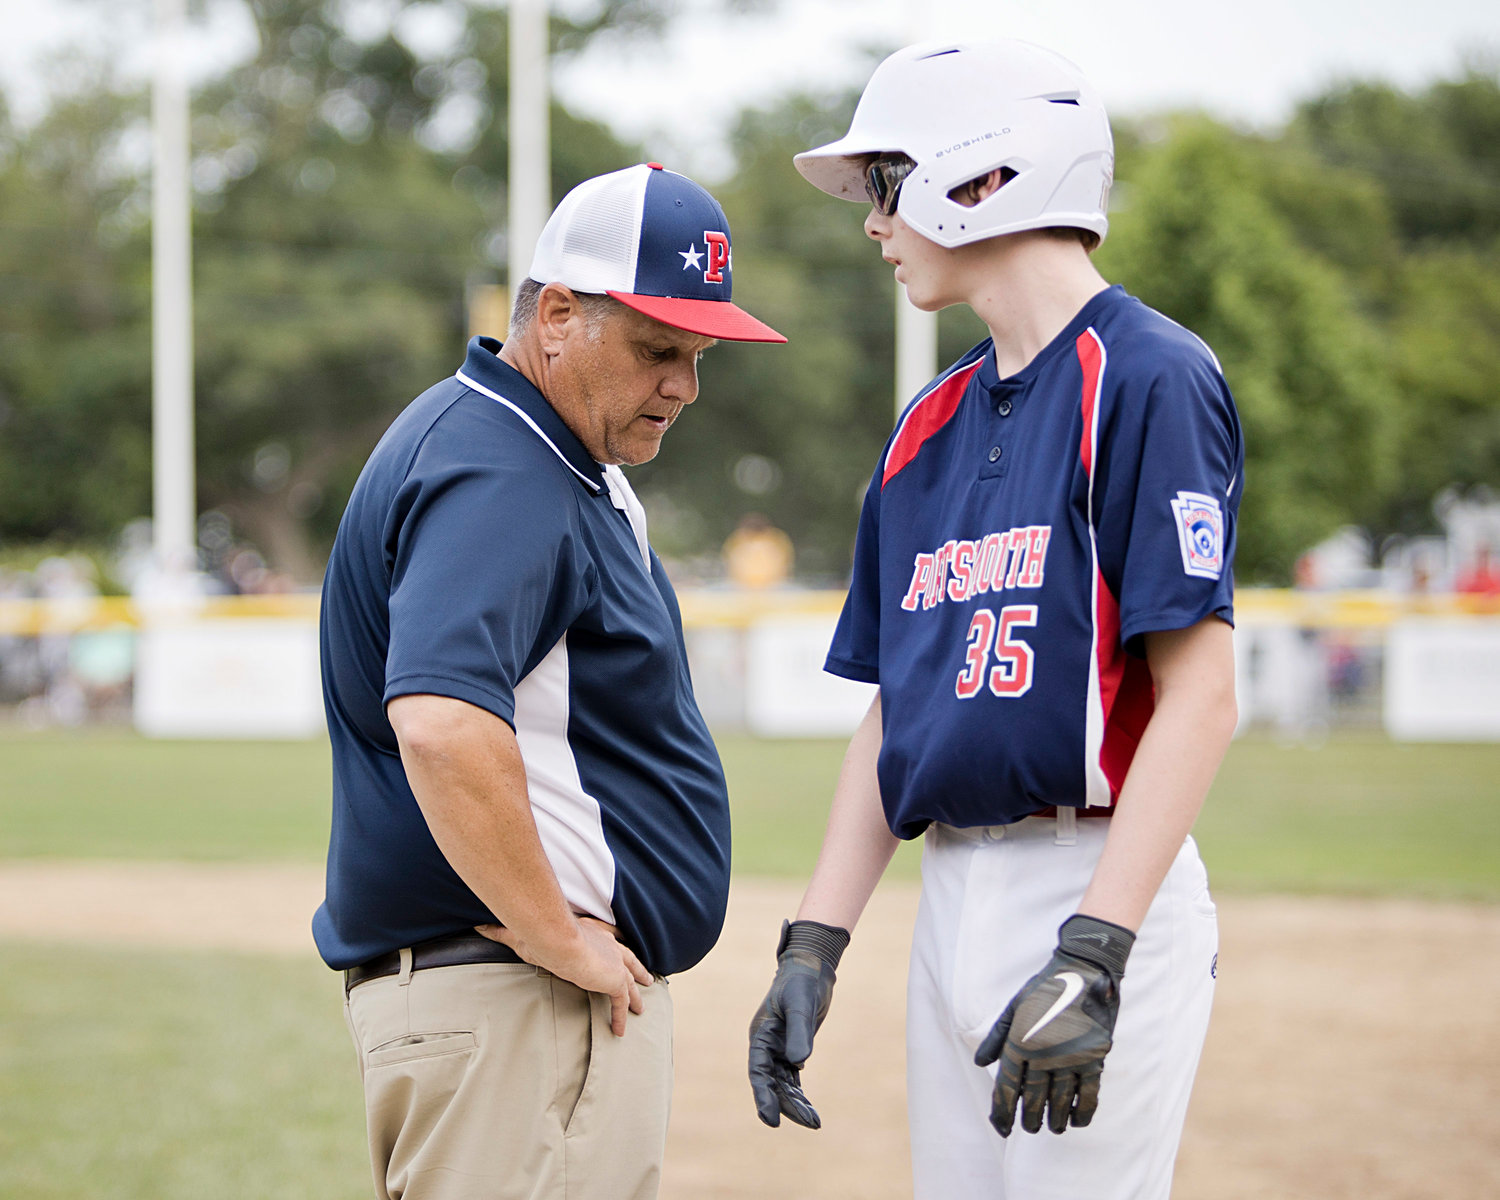 Tyler Boiani takes some advice from manager Bob Campion while standing on first base.